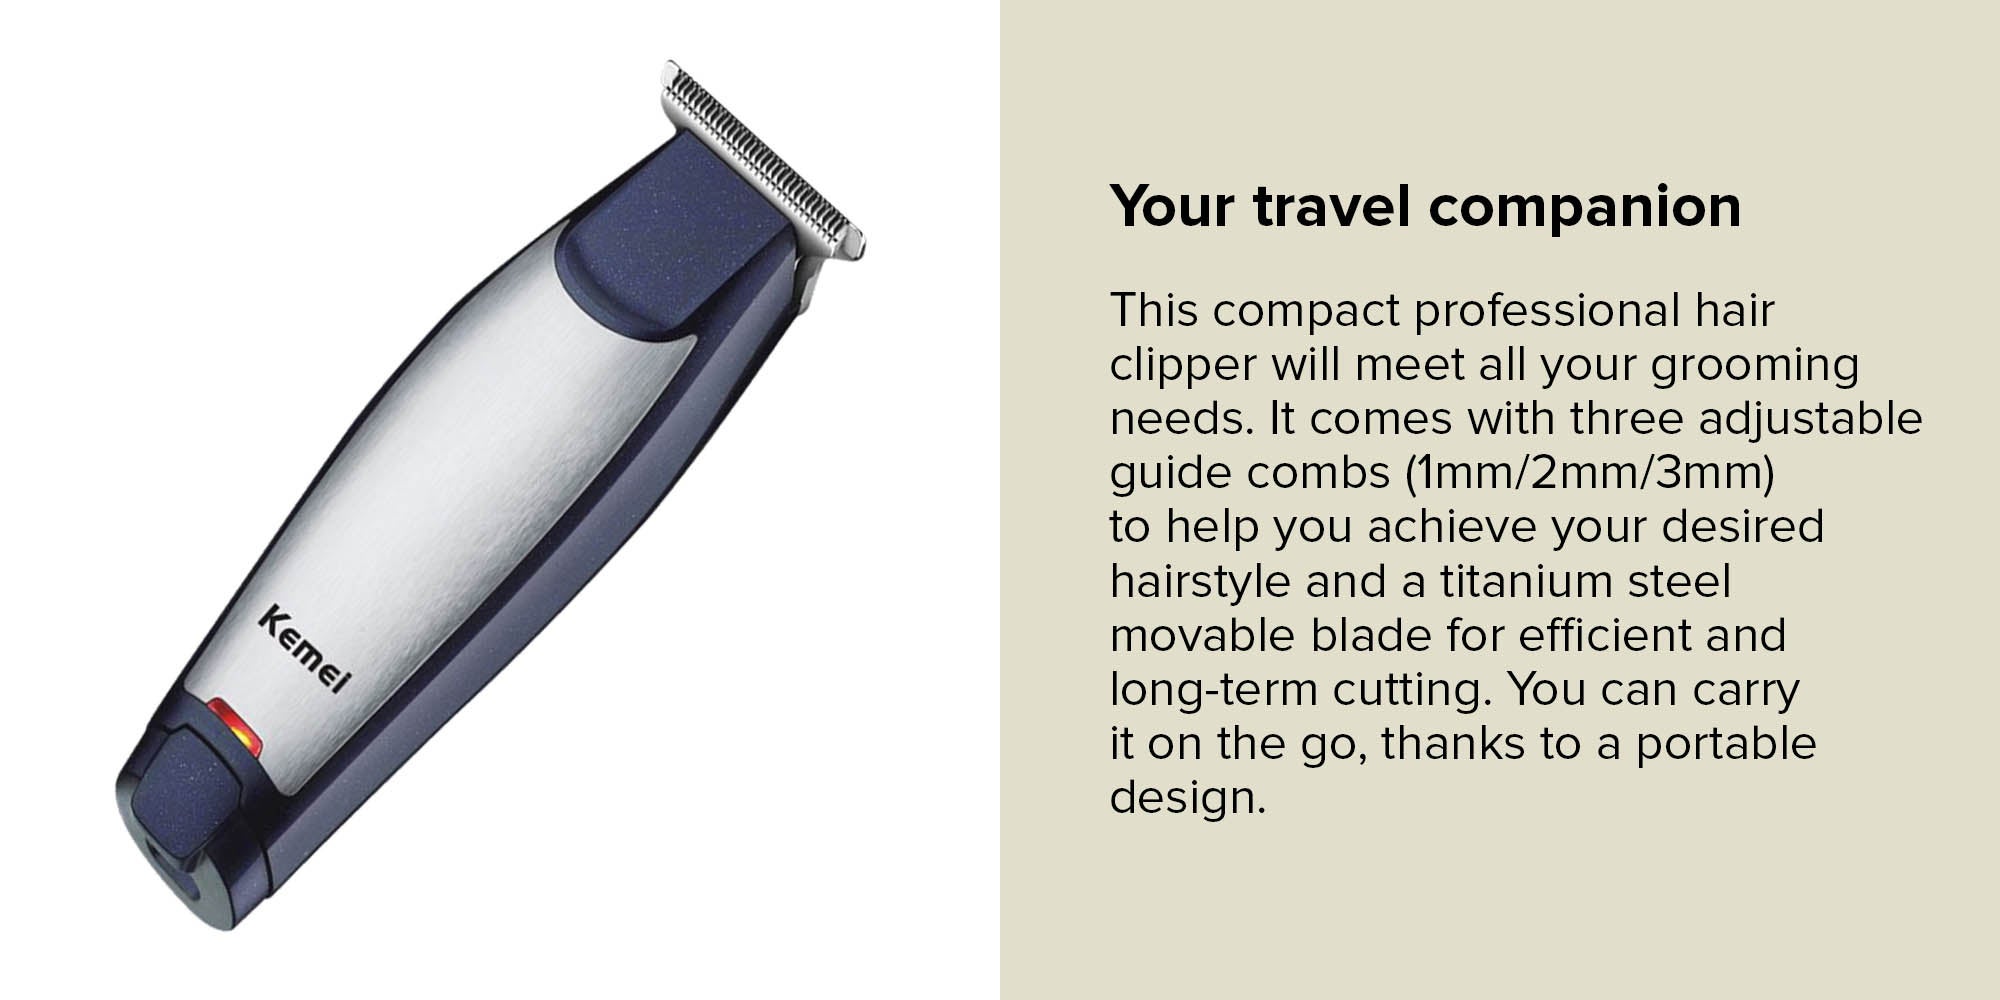 Get Kemei KM-5021 Hair Trimmer, 8 Pieces - Navy with best offers